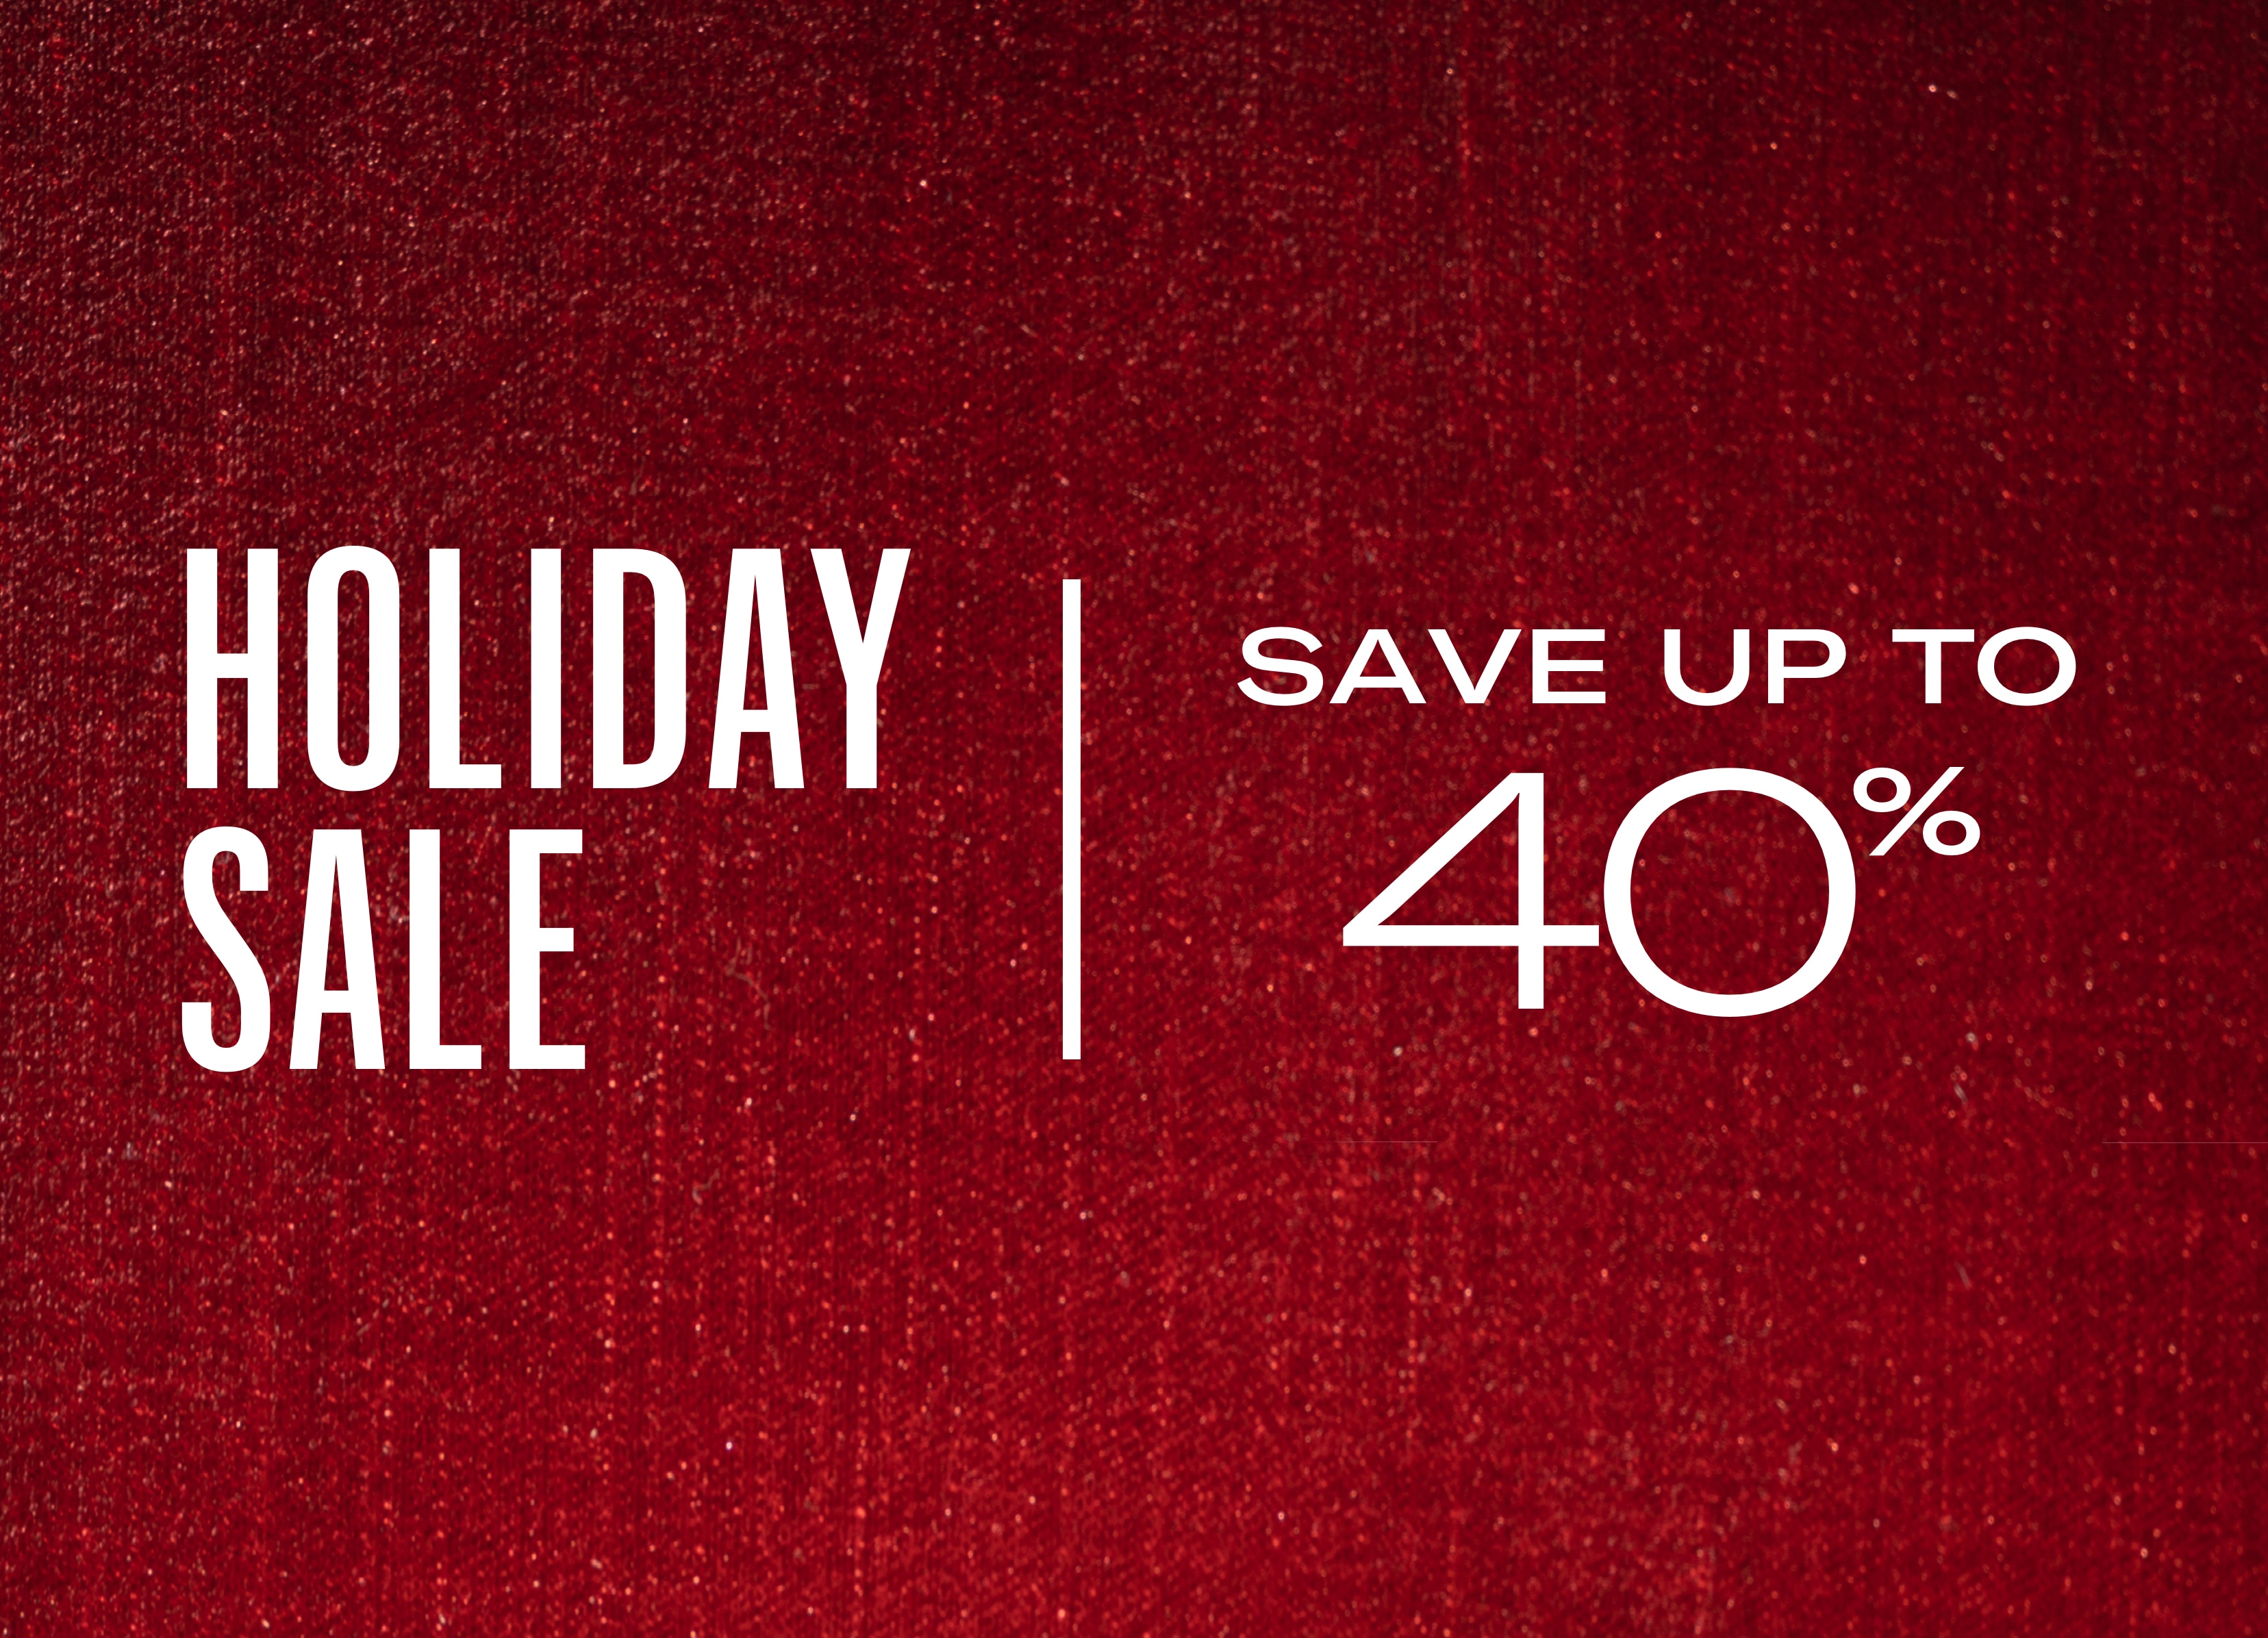 Holiday Sale | Save up to 40% Off